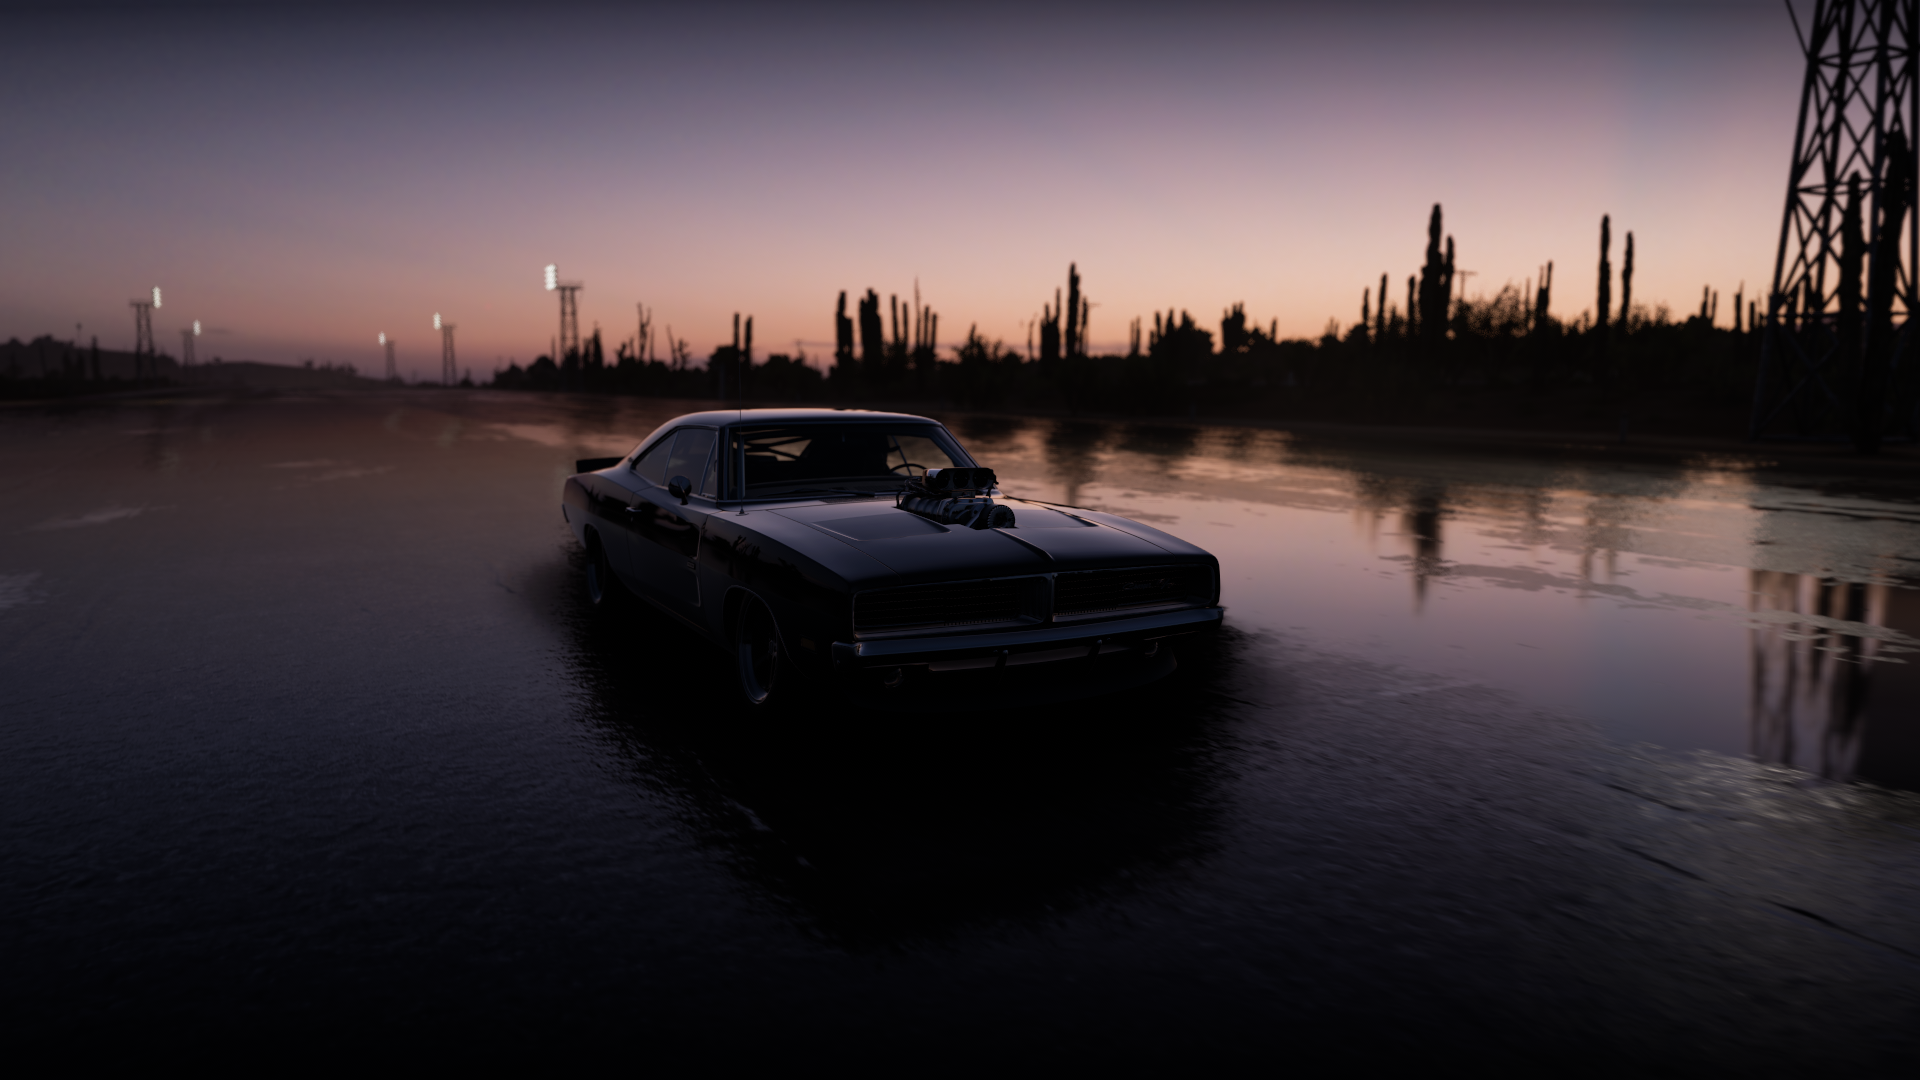 General 1920x1080 Forza Horizon 5 video games beach dark Dodge Charger Dodge American cars PlaygroundGames sky supercharger vehicle sunset sunset glow muscle cars reflection video game art CGI